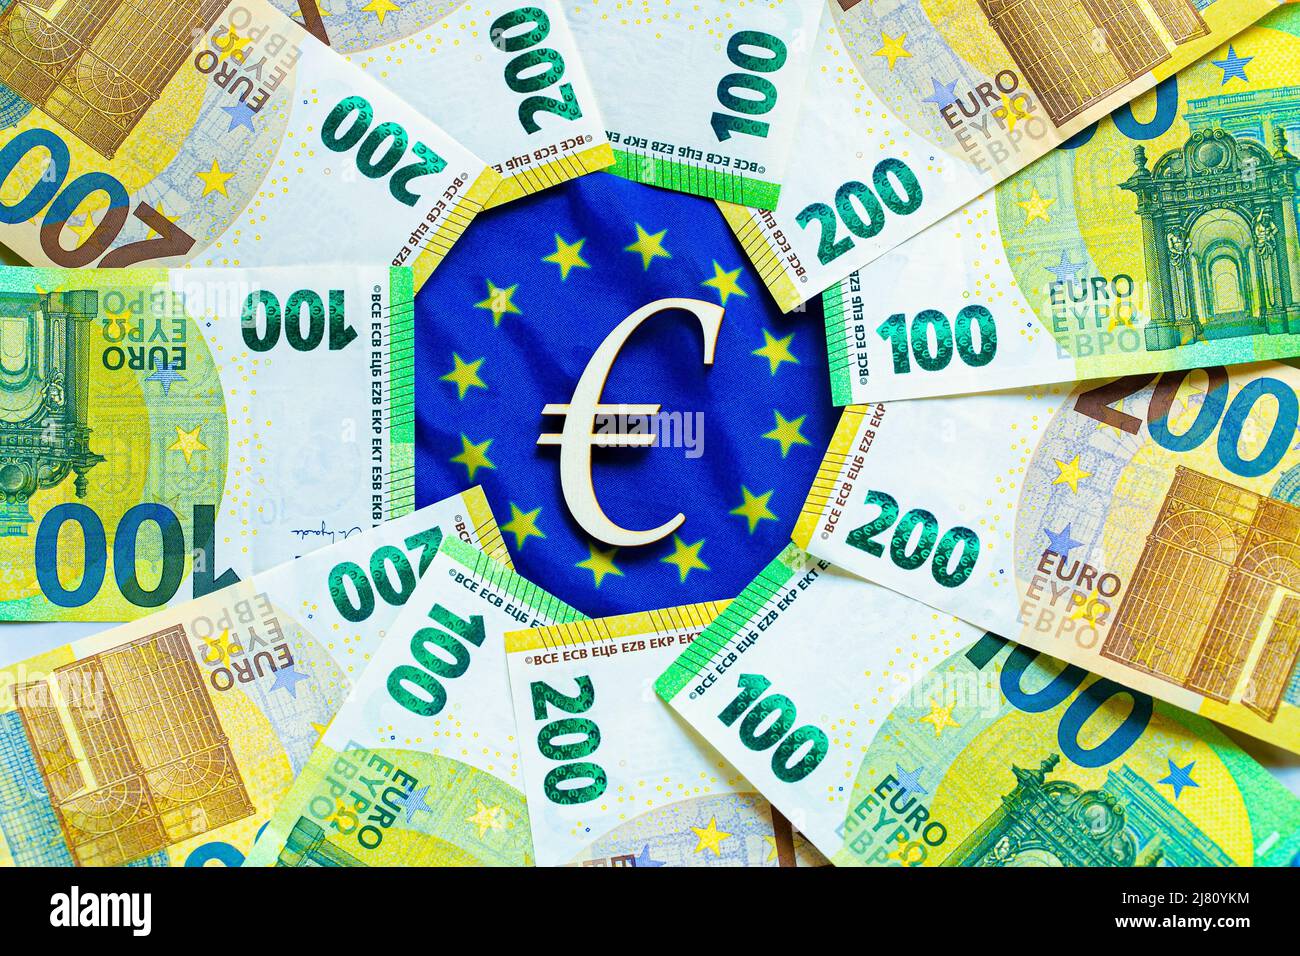 Euro exchange rate. state of the economy and currency of the EU countries. euro bills and the sign on the flag of the European Union.Depreciation of Stock Photo